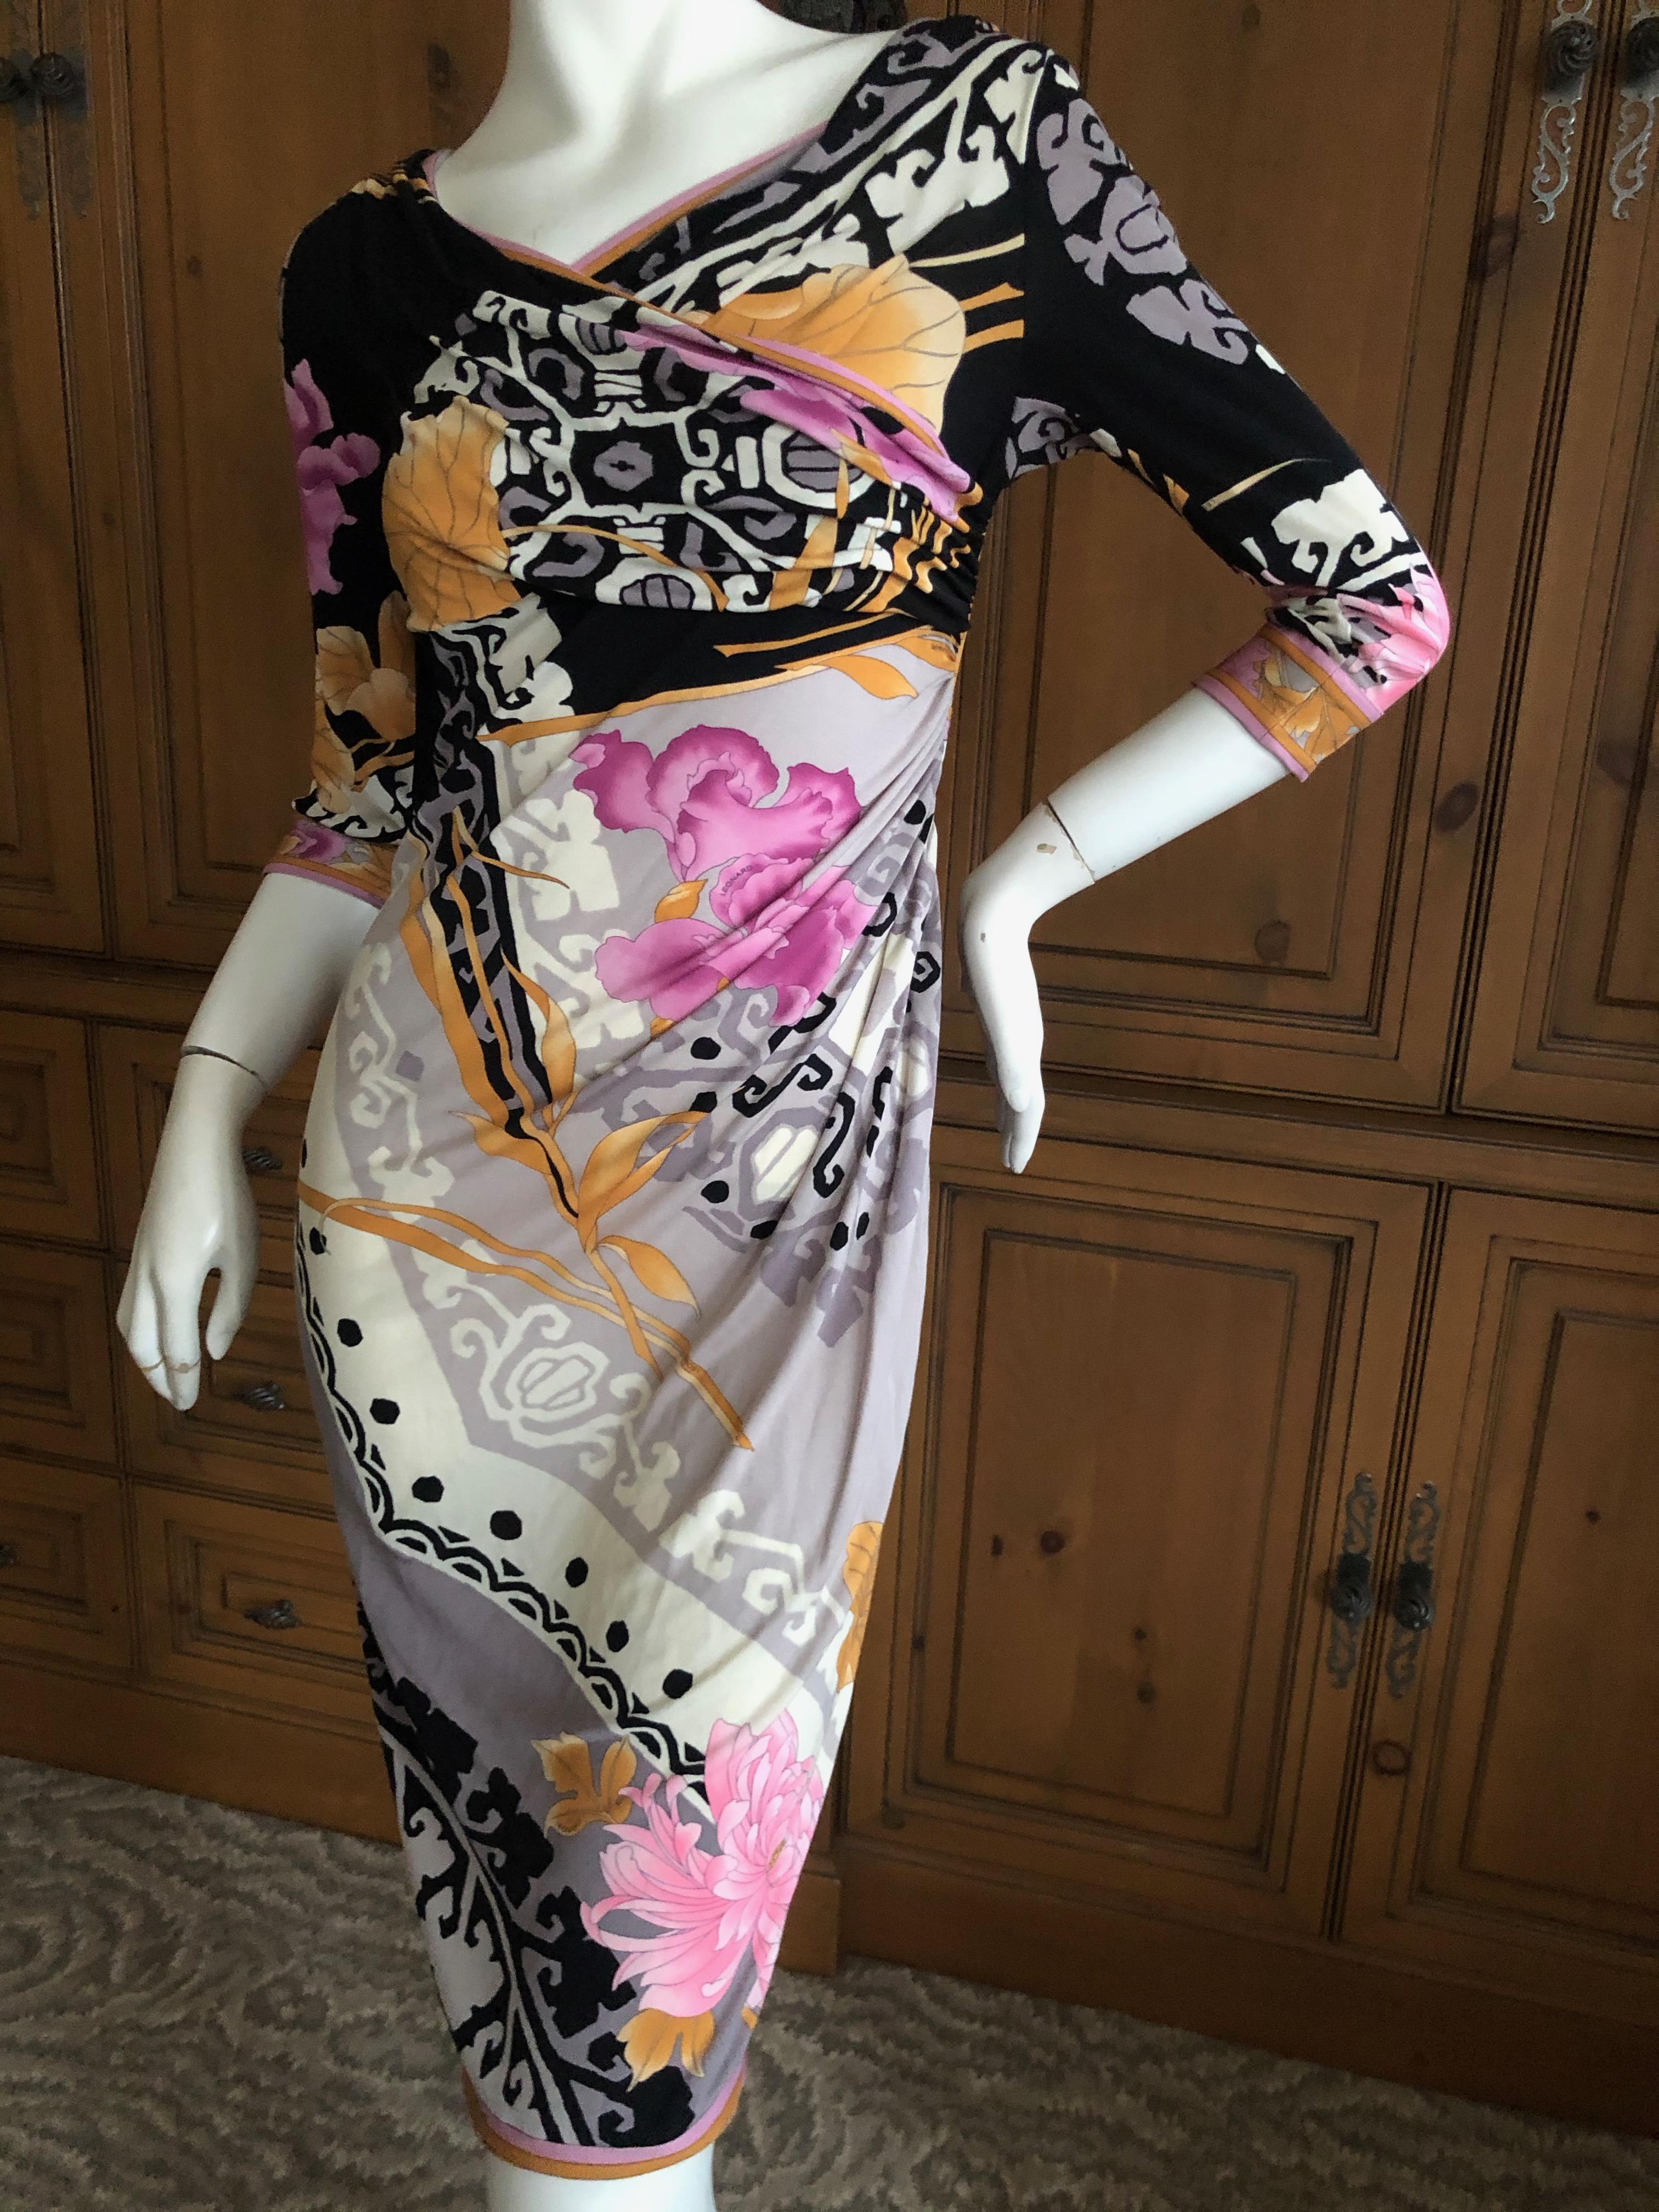 Leonard Paris Silk Jersey Vintage Floral & Aztec Pattern Shirred Cocktail Dress.
I think the bust might have been sewn up a little for modesty, it was originally very very low cut.
Leonard Paris was a contemporary of Pucci, both houses creating